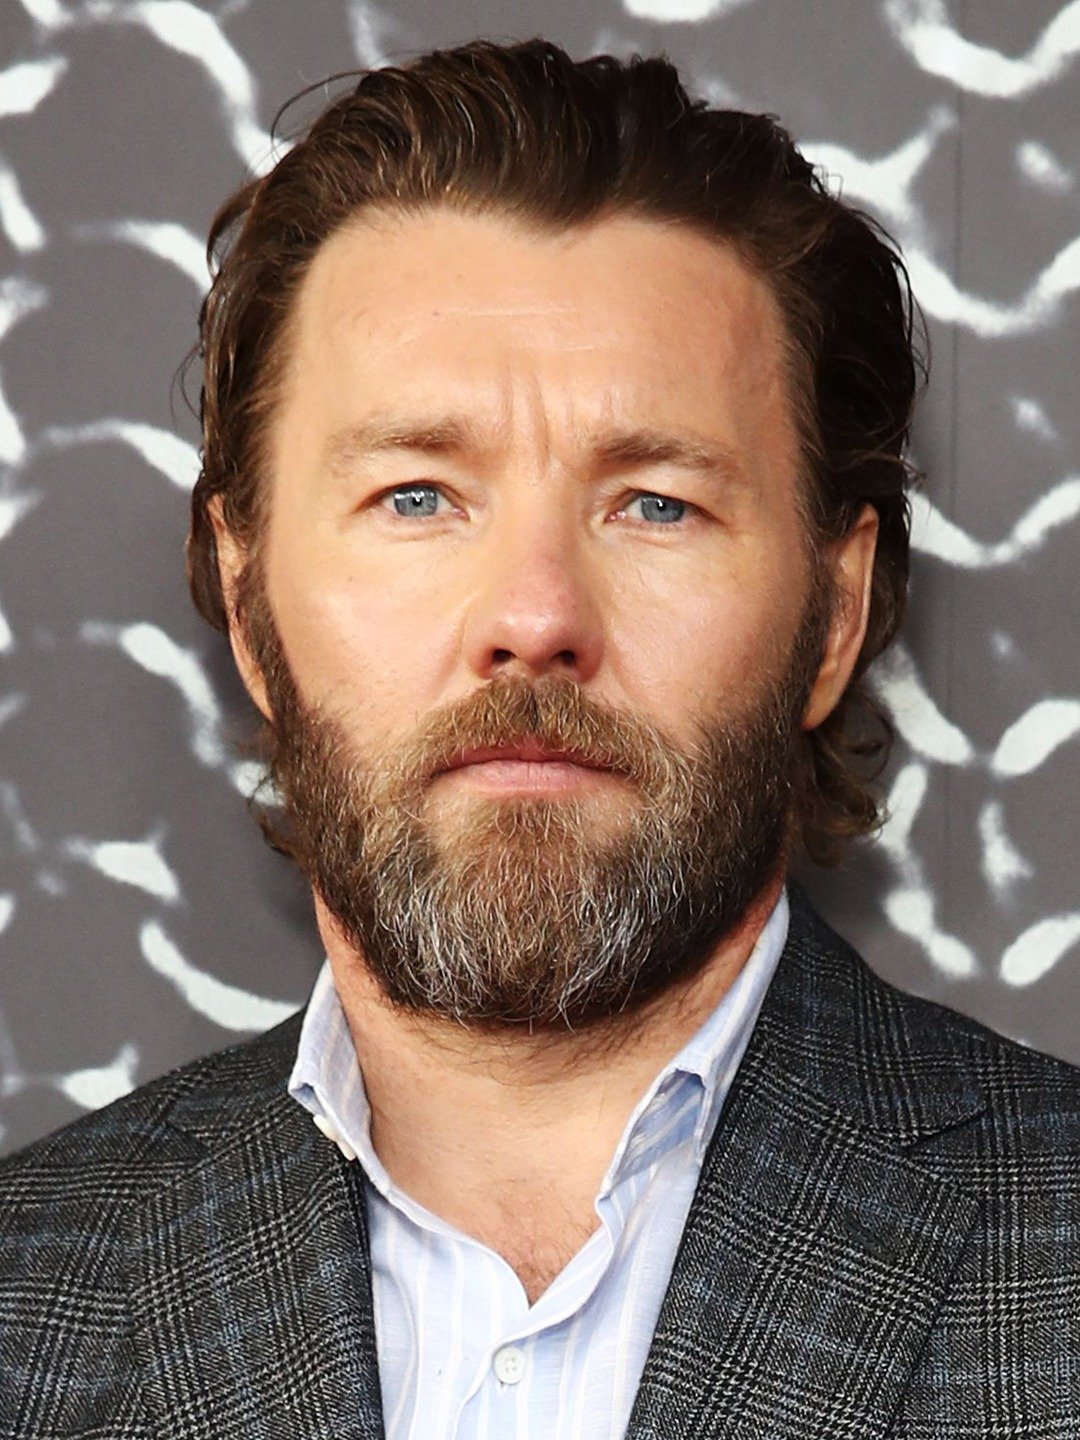 Joel Edgerton - A Multifaceted Talent In The Hollywood Film Industry